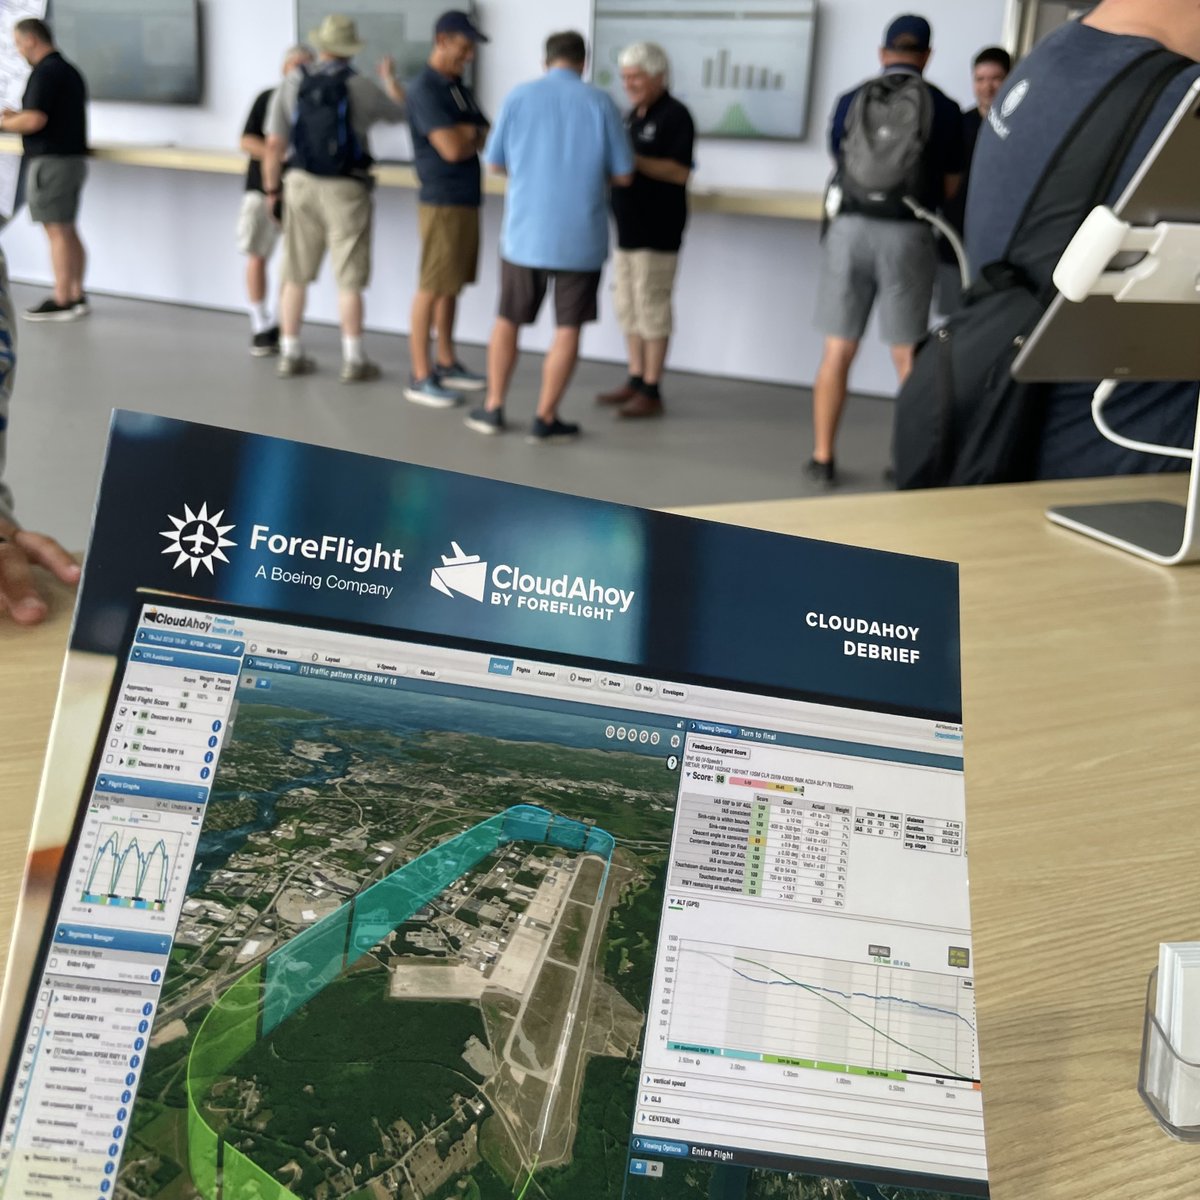 This week, stop by Boeing Pavilion for in-depth demos on the power of flight debriefing with CloudAhoy and to get a 3 month free trial! @CloudAhoy #OSH23